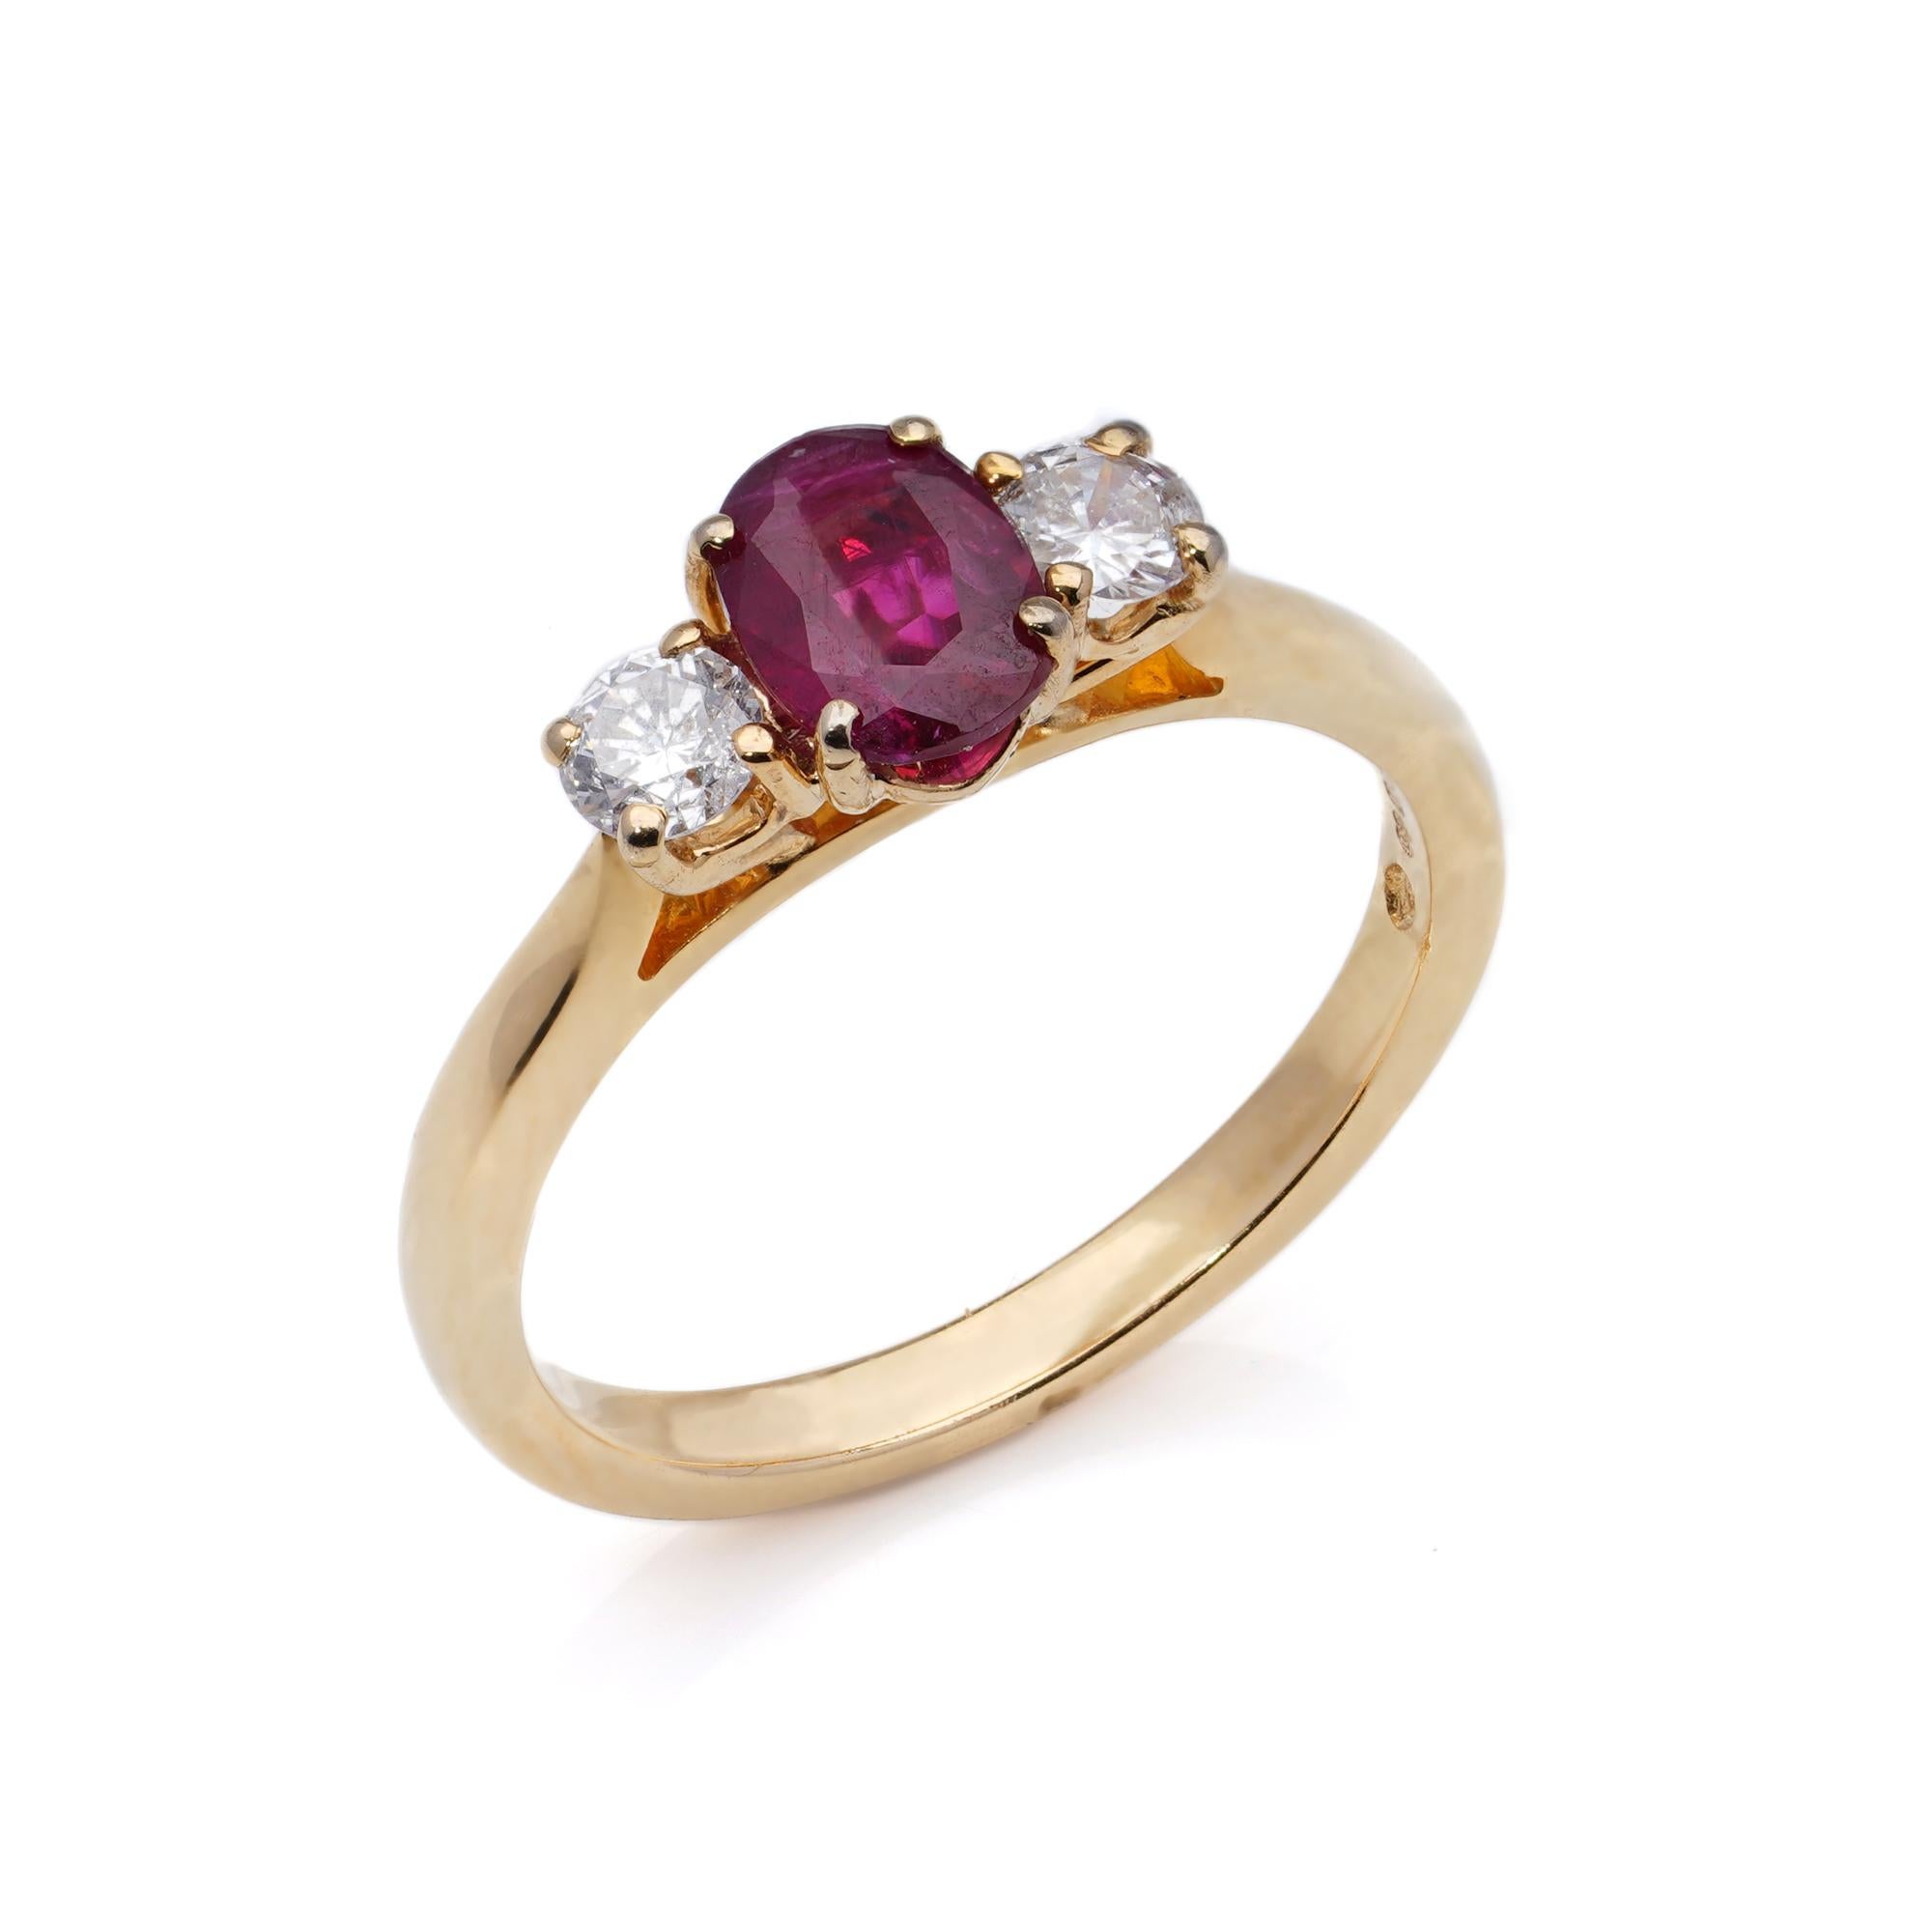 18kt. yellow gold ladies three-stone ring, set with 0.50  ct. ruby and 0.20 ct. brilliant diamonds. 
Made in London.
Fully hallmarked.

This elegant ladies' three-stone ring comes in a beautiful 18kt. yellow gold with a 1.00 ct. ruby center and 0.10